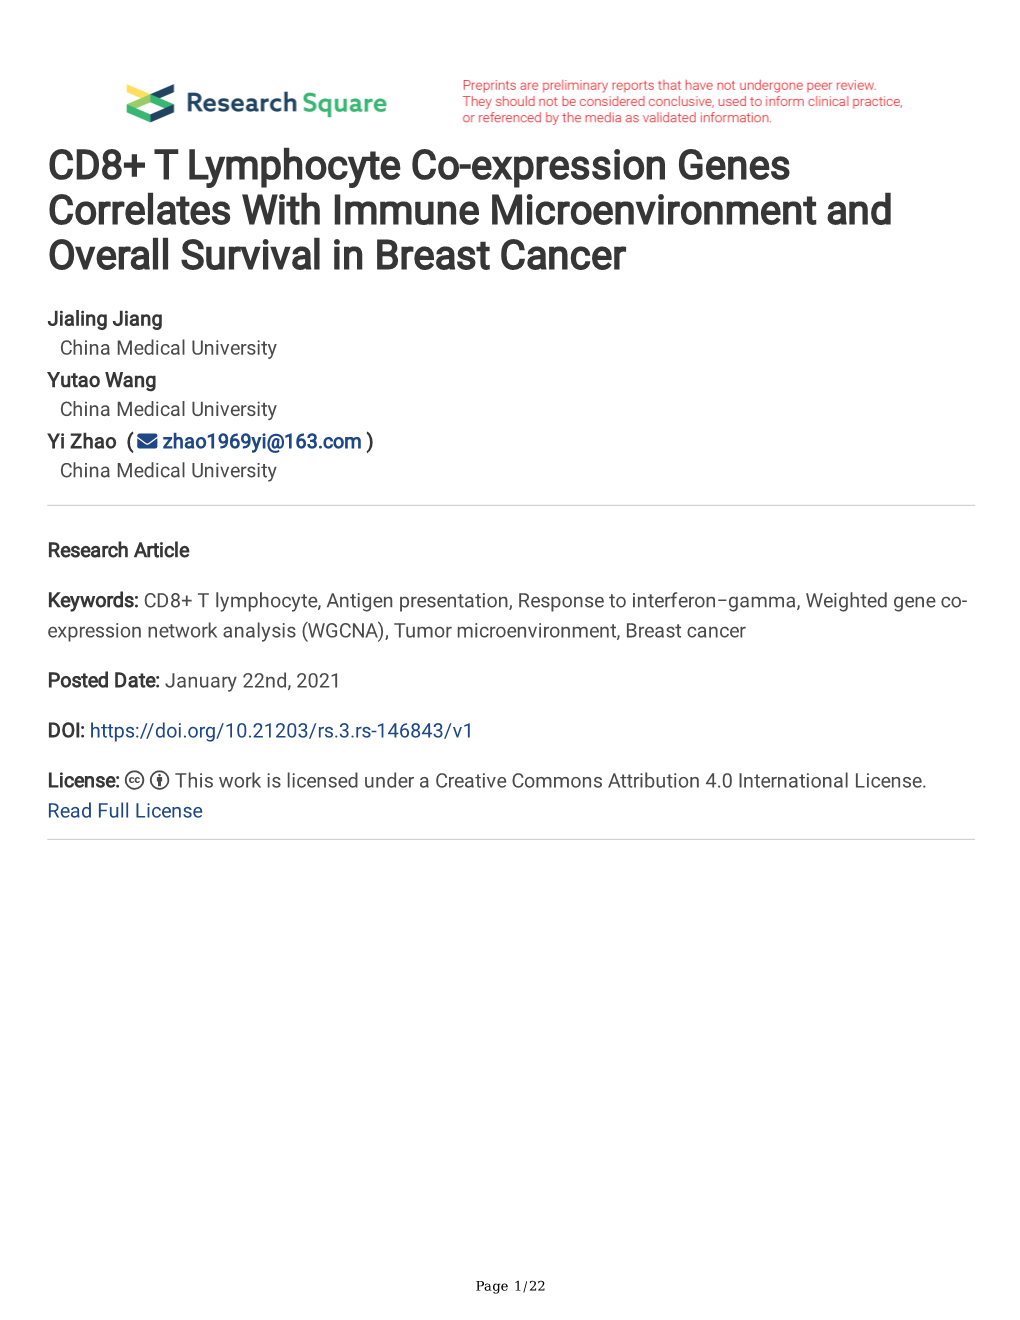 CD8+ T Lymphocyte Co-Expression Genes Correlates with Immune Microenvironment and Overall Survival in Breast Cancer